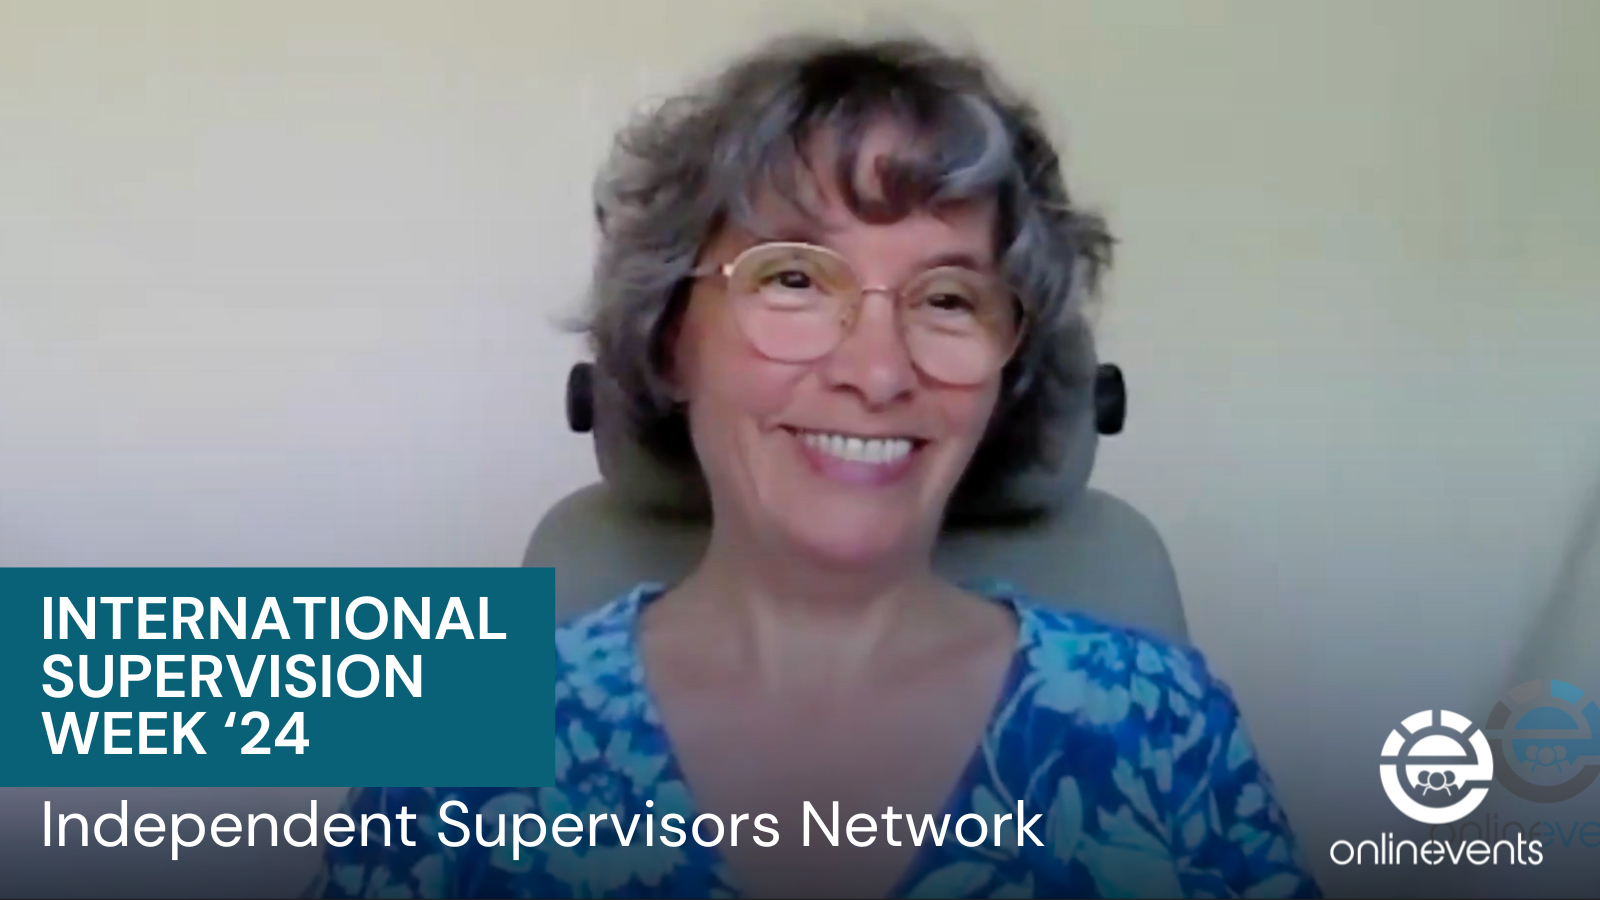 The 8 Facets Model of IFS Supervision Workshop with Emma Redfern